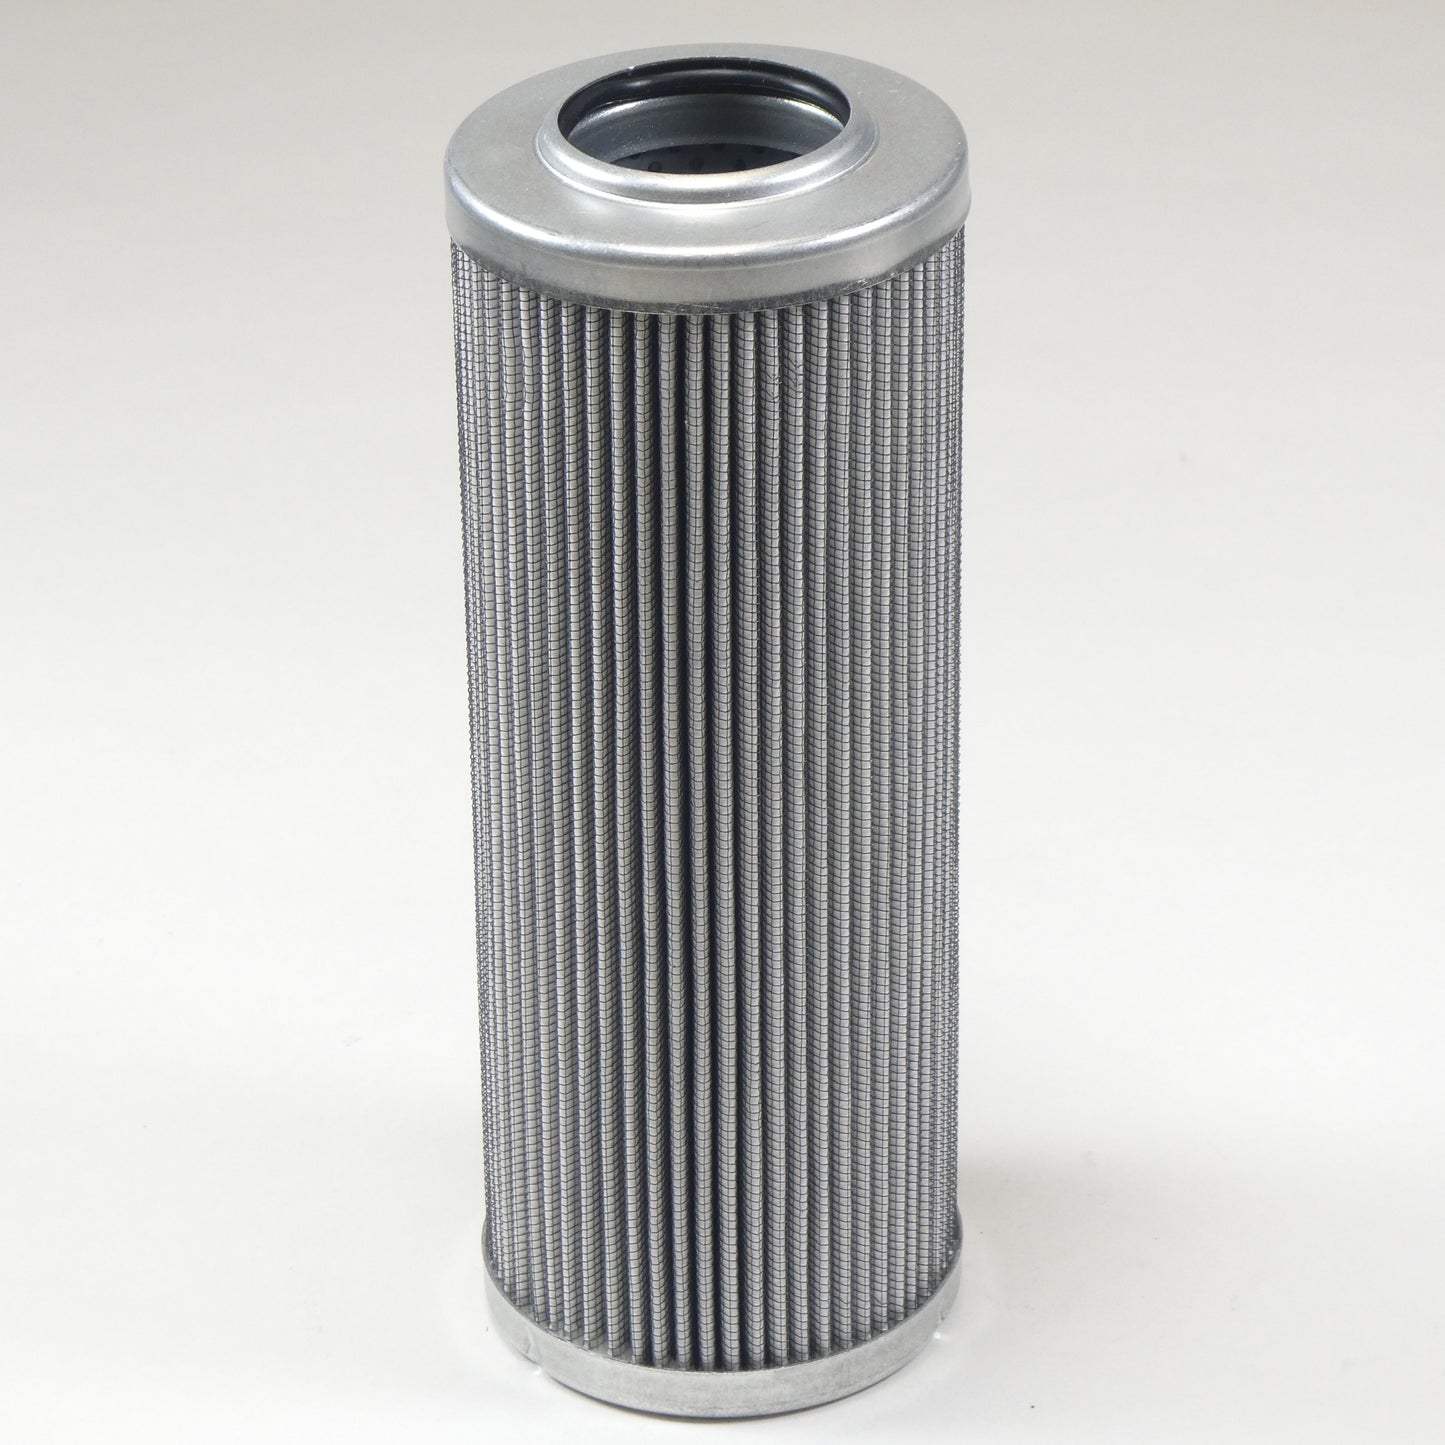 Hydrafil Replacement Filter Element for Varco Drilling 30173216-1